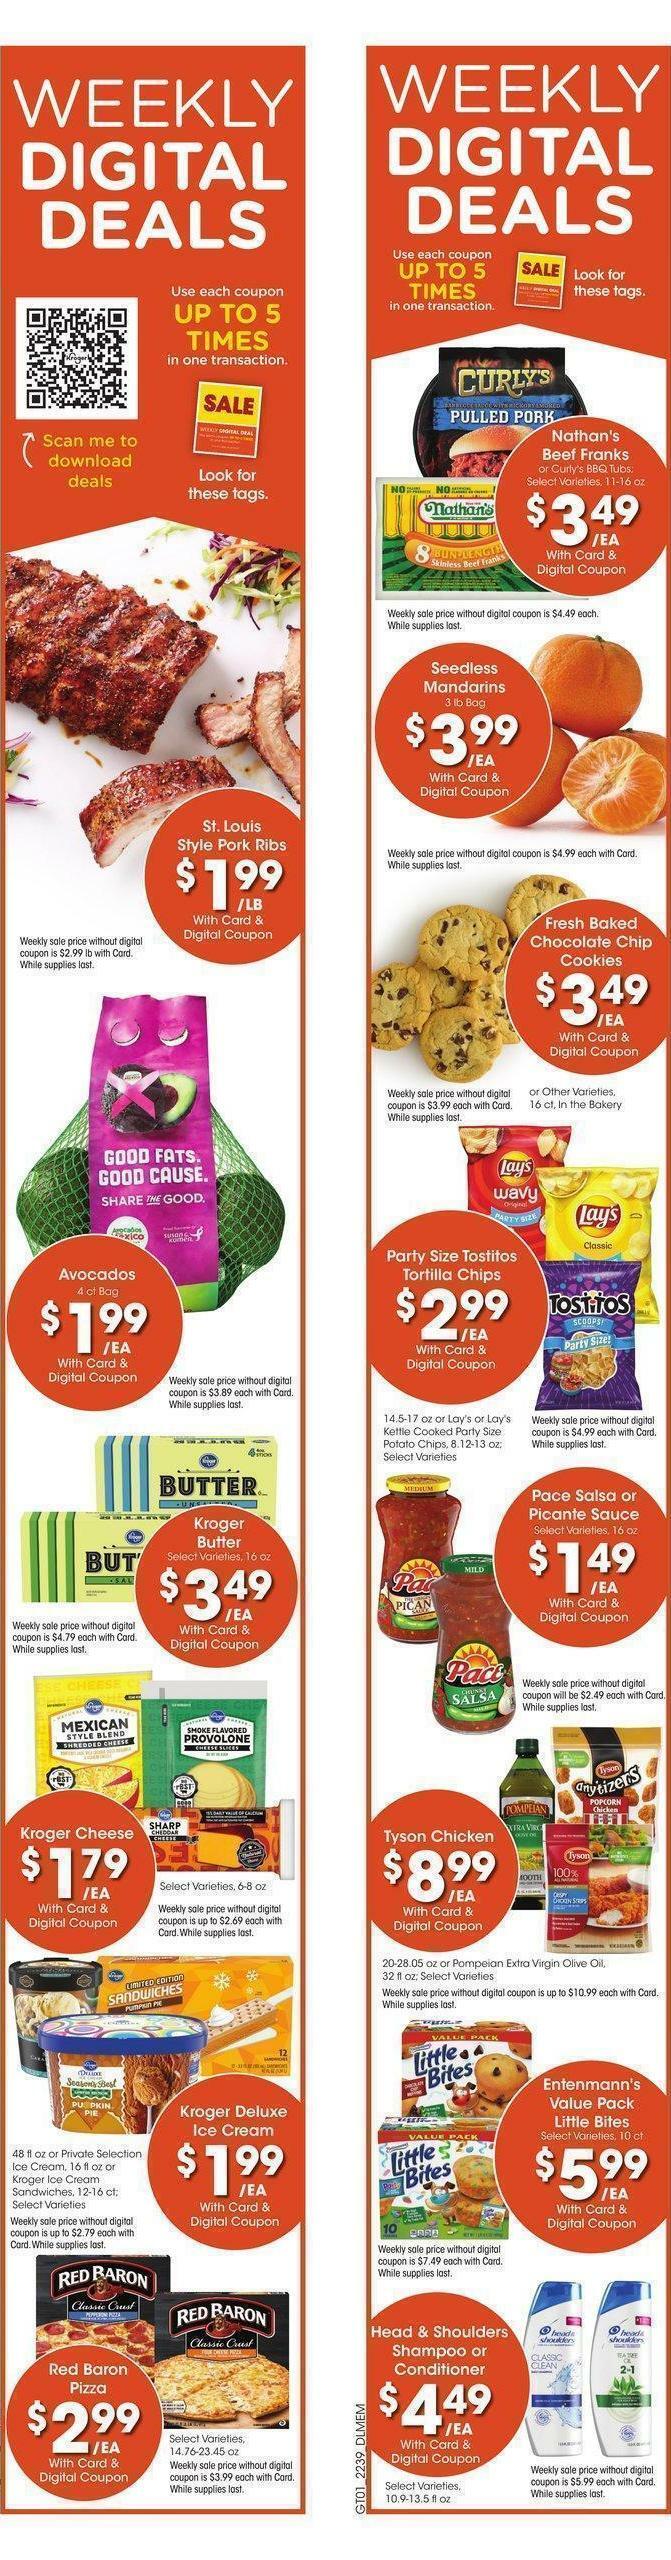 Kroger Weekly Ad from October 26